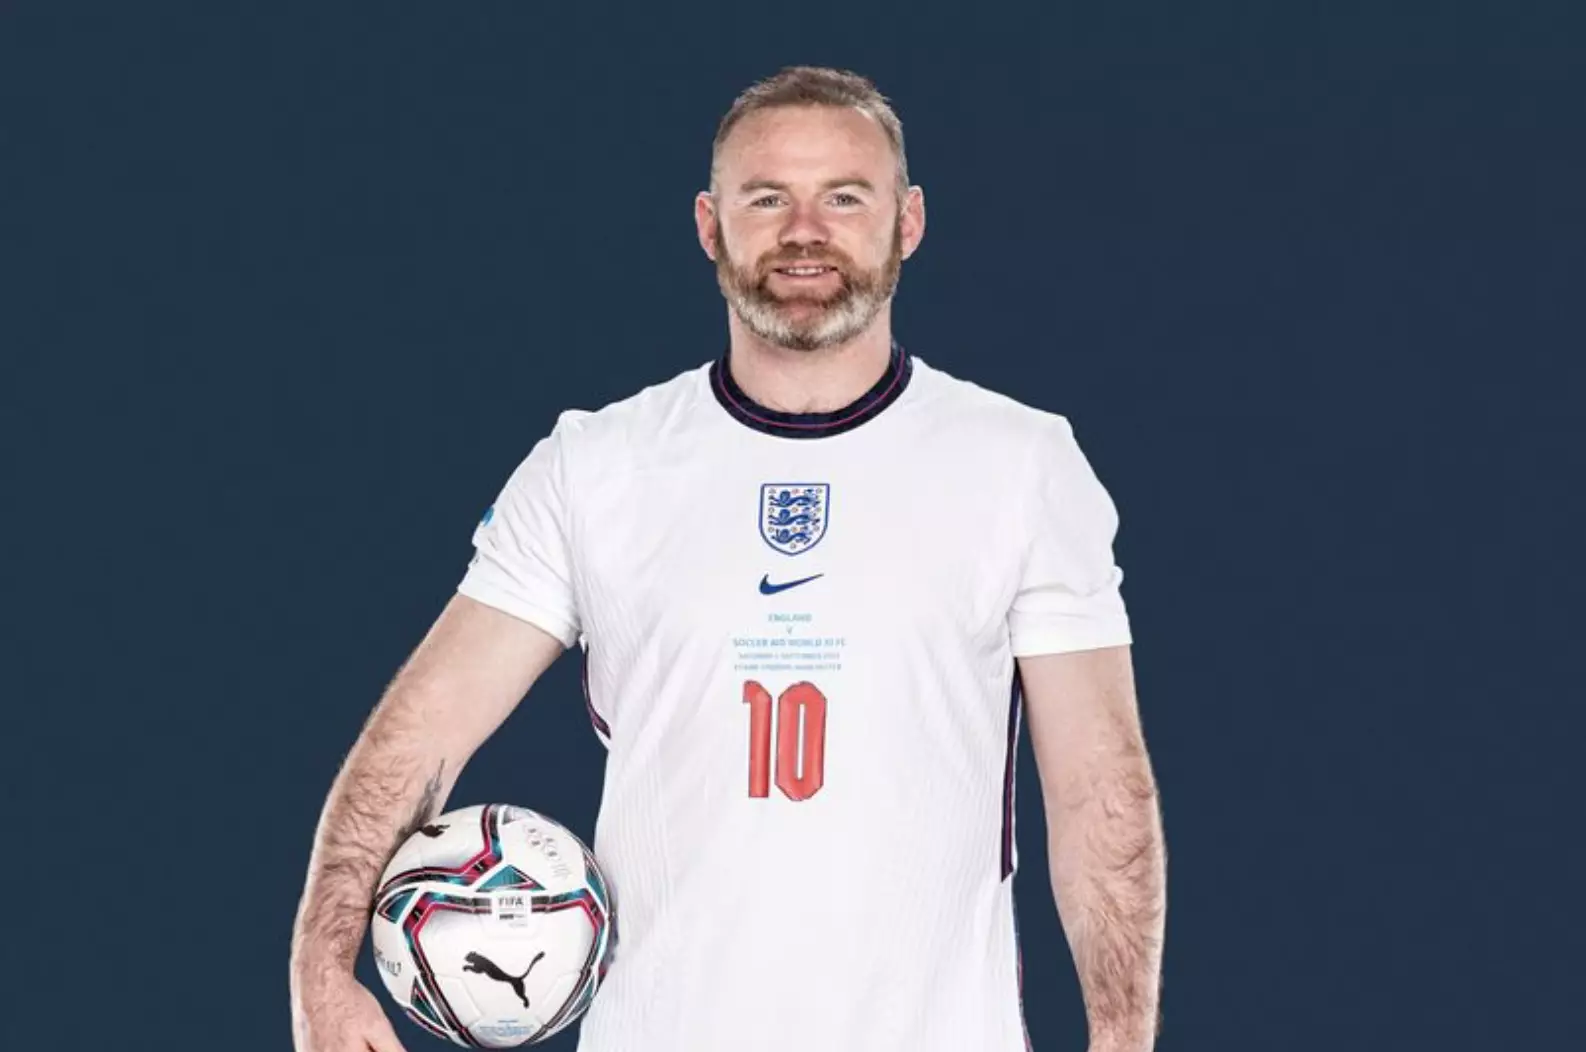 Wayne Rooney will step out of retirement in September to play in Soccer Aid 2021